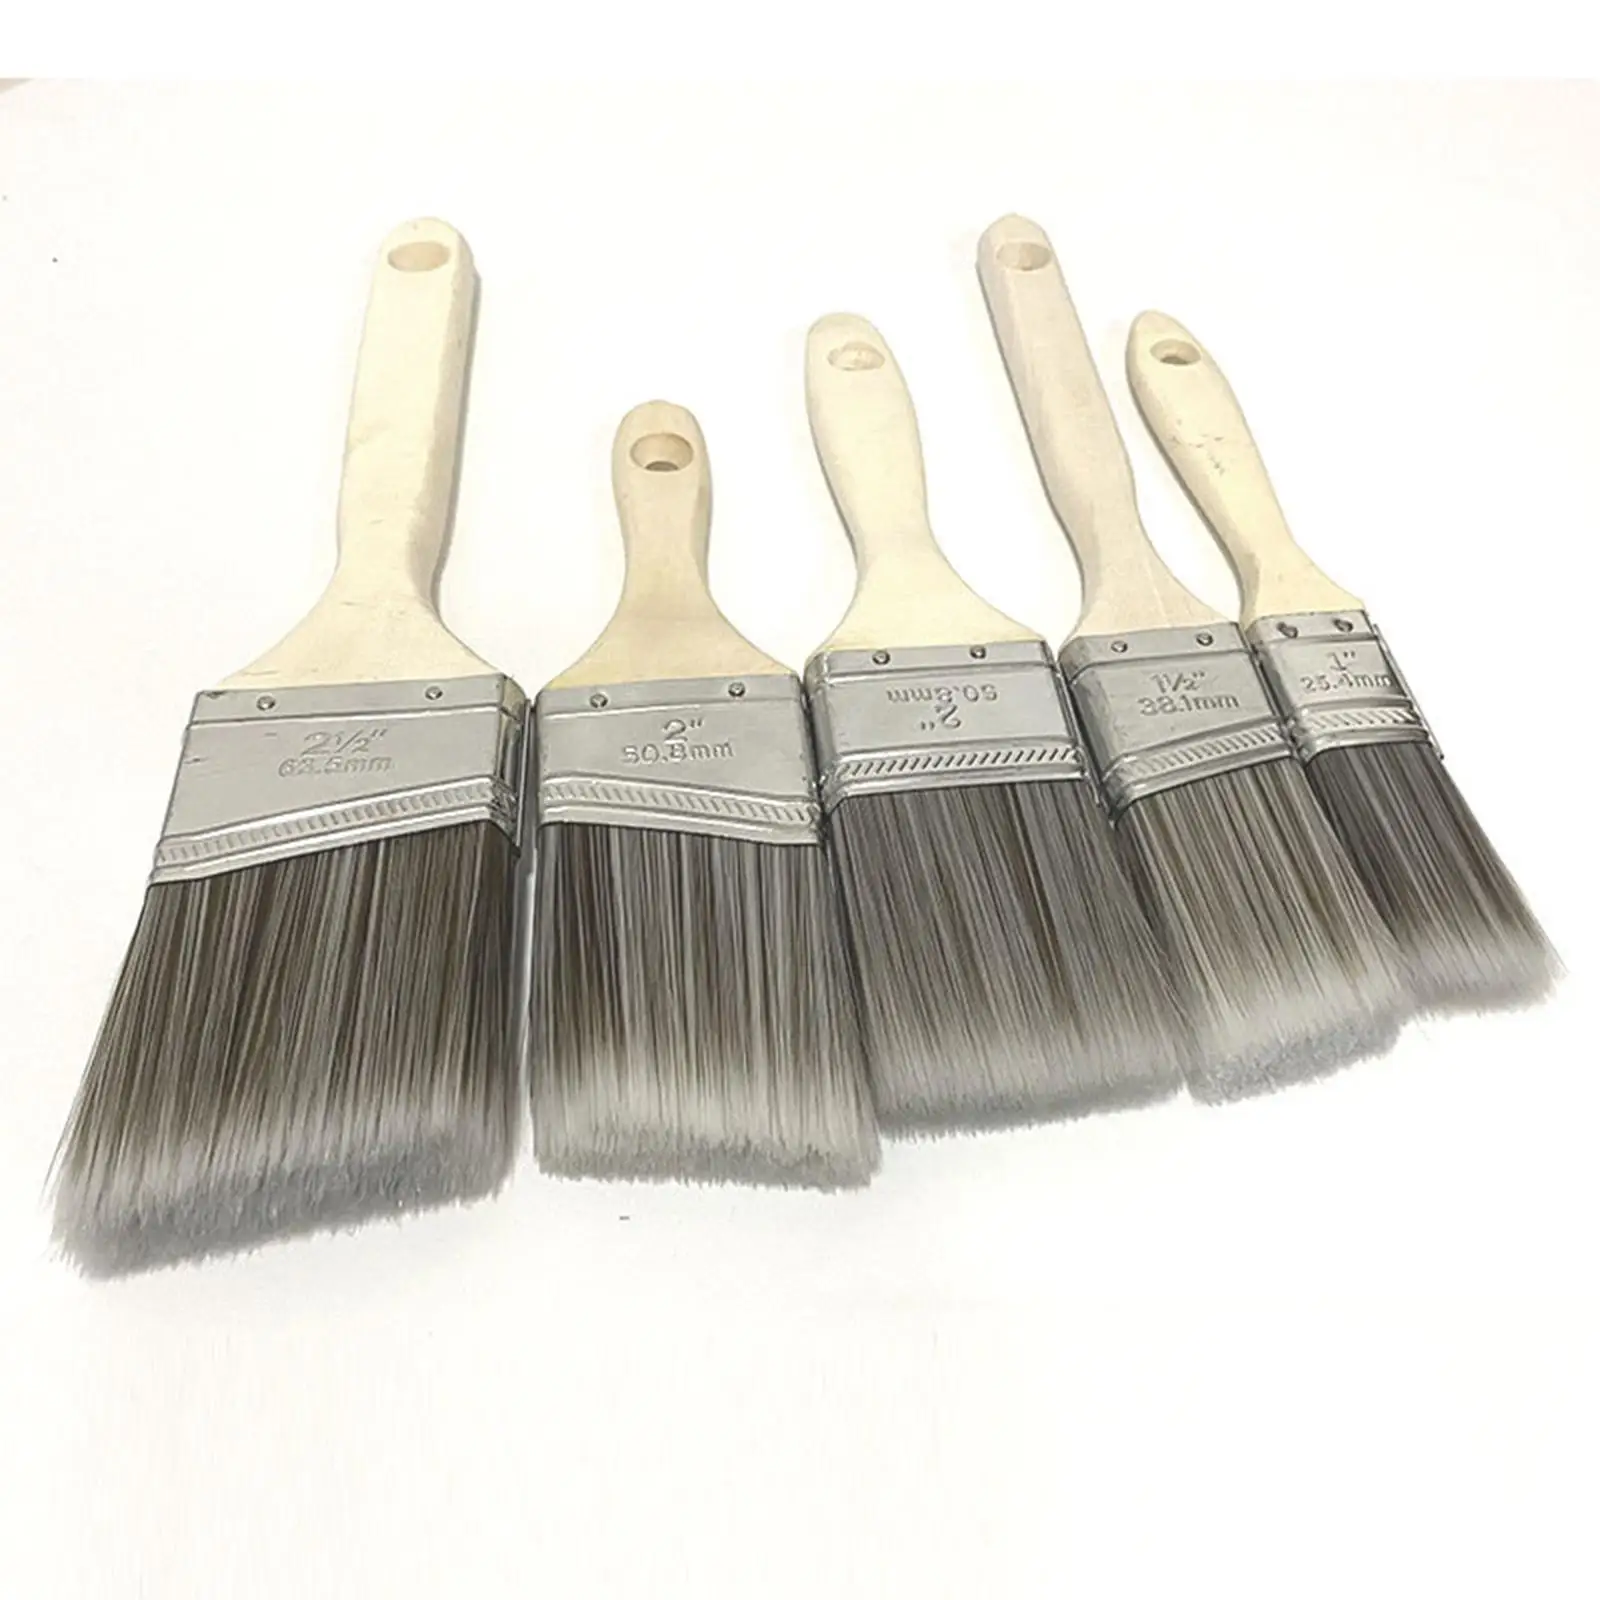 5 Pieces Paint Brushes House Paint Brush Oil Painting Brushes Art Paint Brushes for Nursery Room Decks Baseboards Outdoor Decks